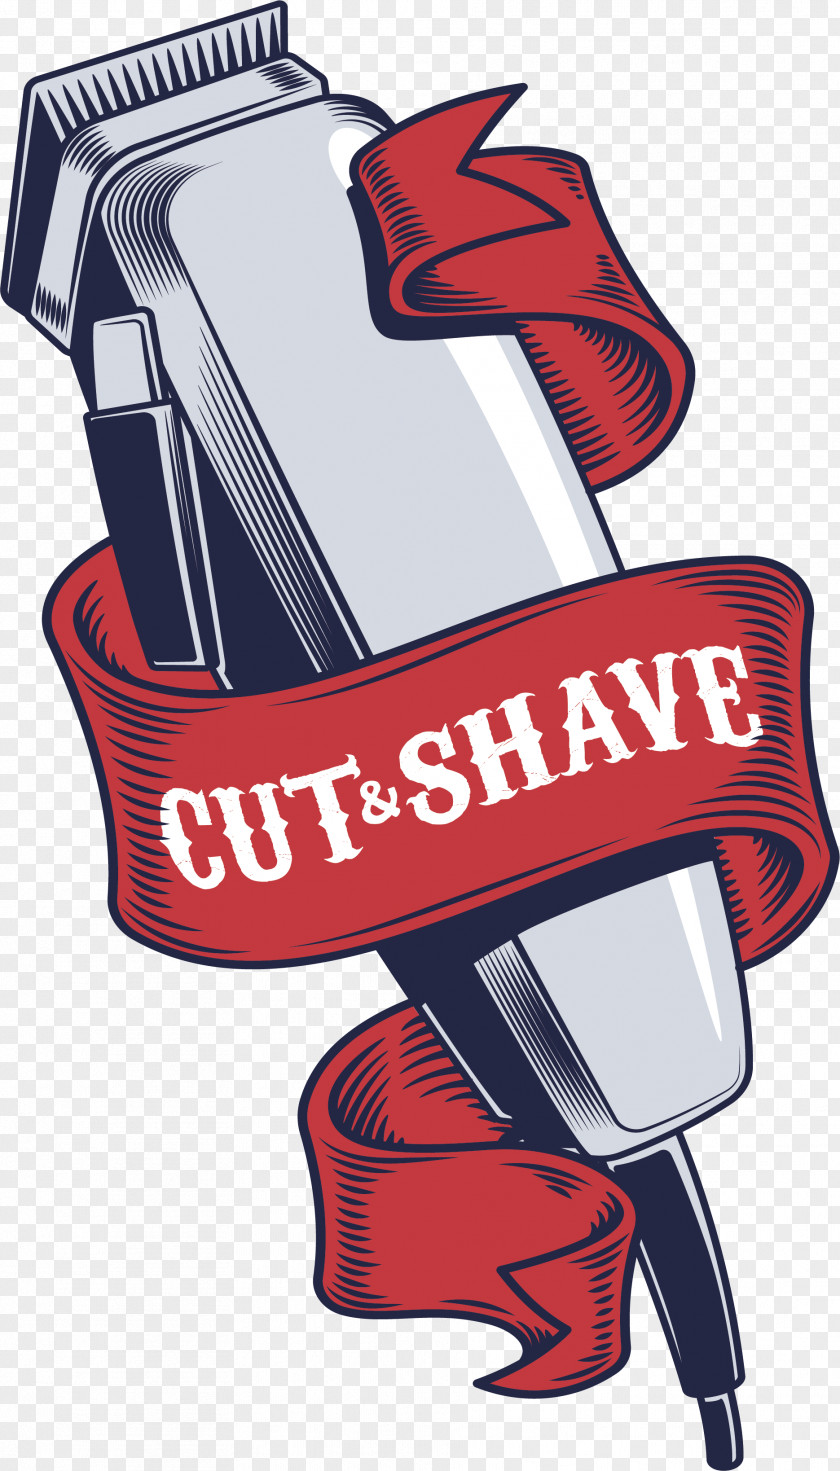 Grey Hair Razor Clipper Shaving Hairstyle PNG